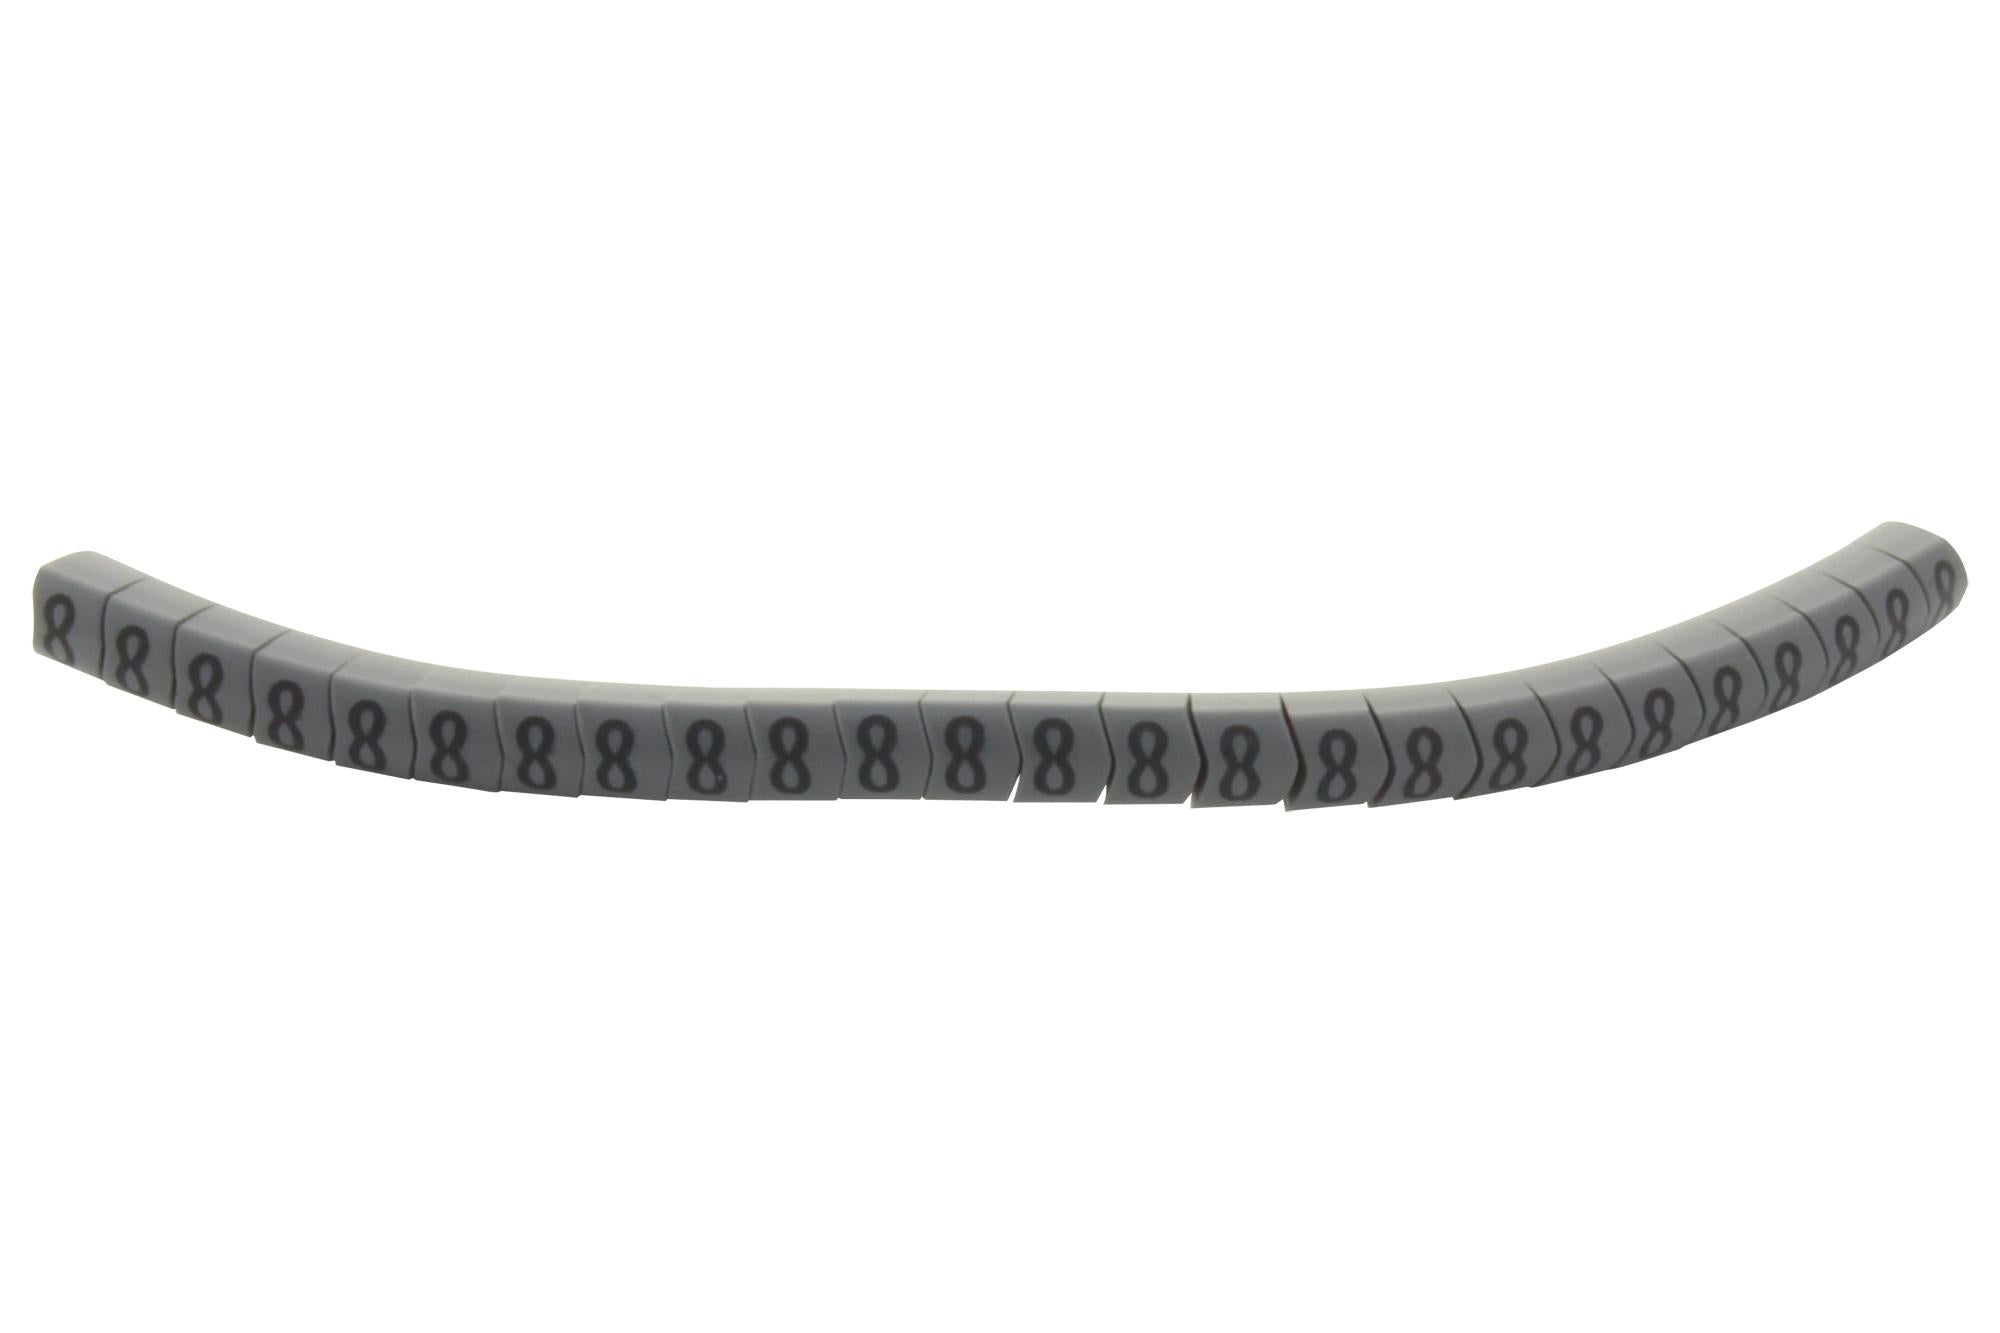 901-11058 CABLE MARKER, PRE PRINTED, PVC, GREY HELLERMANNTYTON